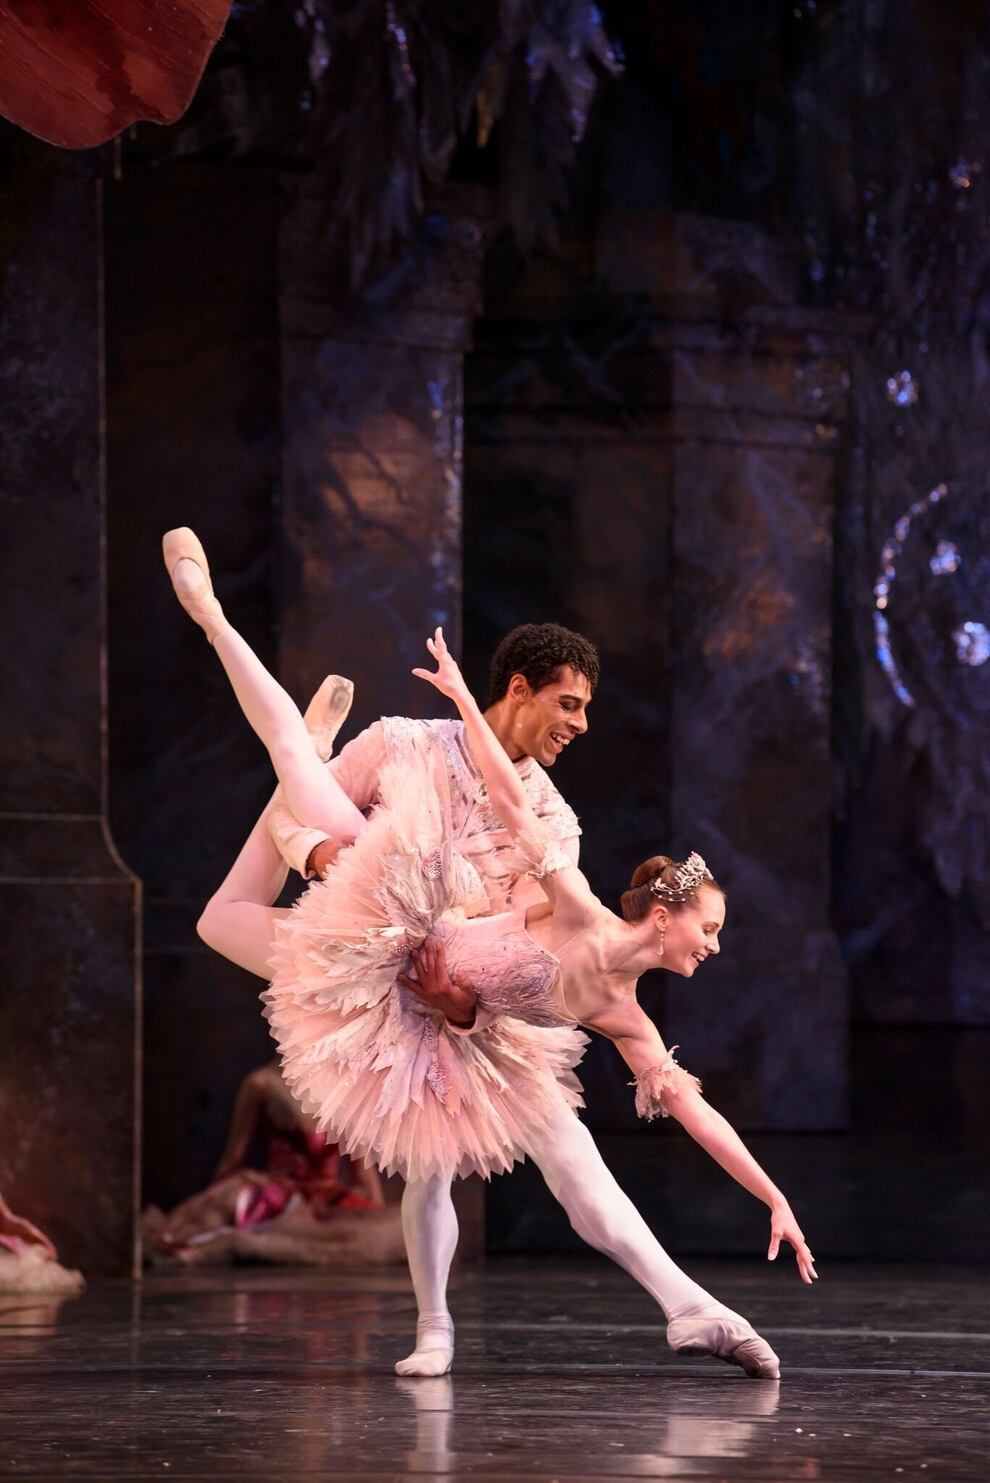 The Nutcracker, Birmingham Hippodrome review with pictures